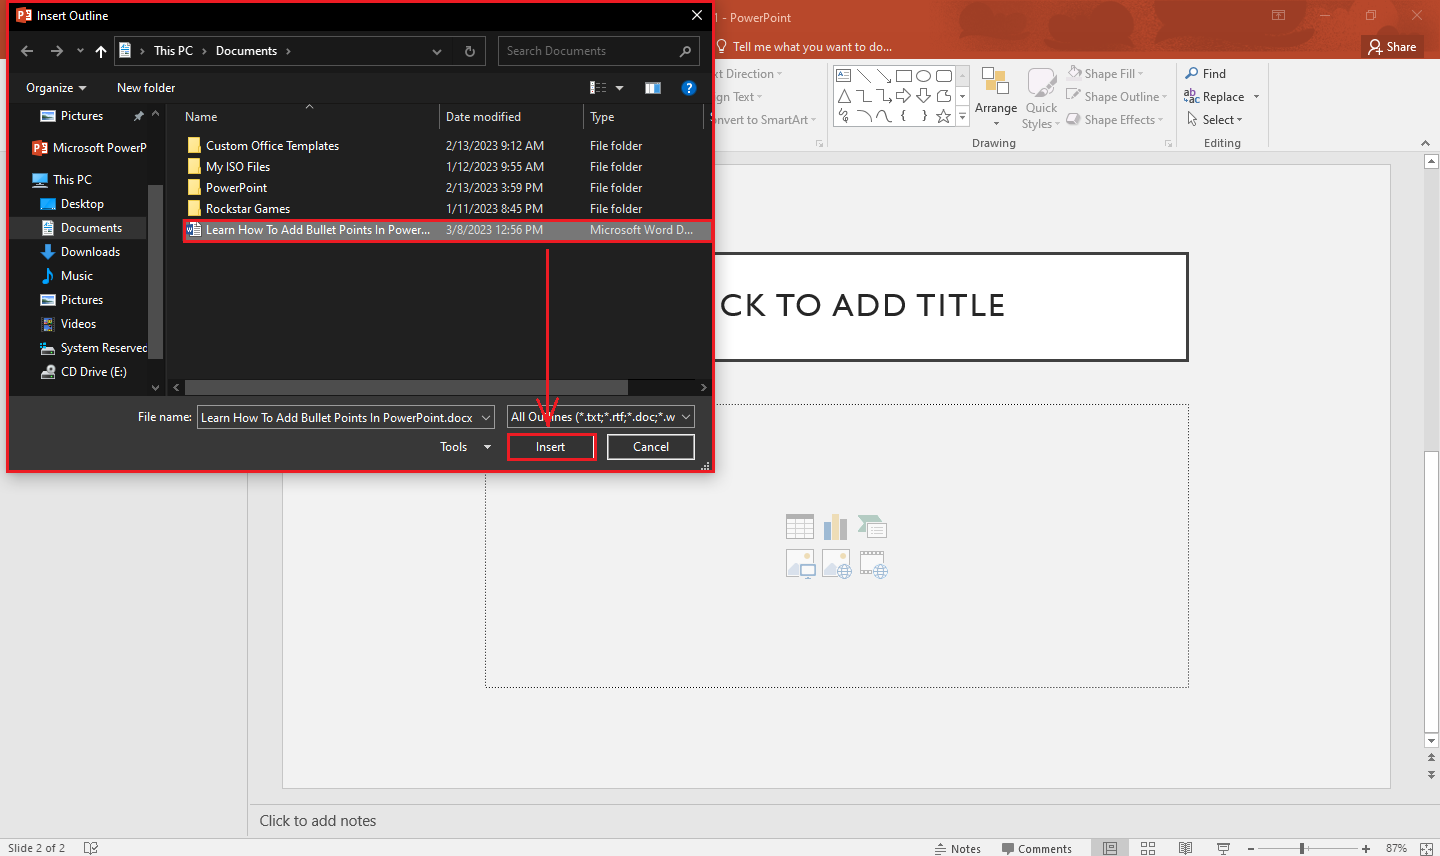 In the "Insert Outline" dialog box, navigate and select the outline file you want to insert into your presentation.